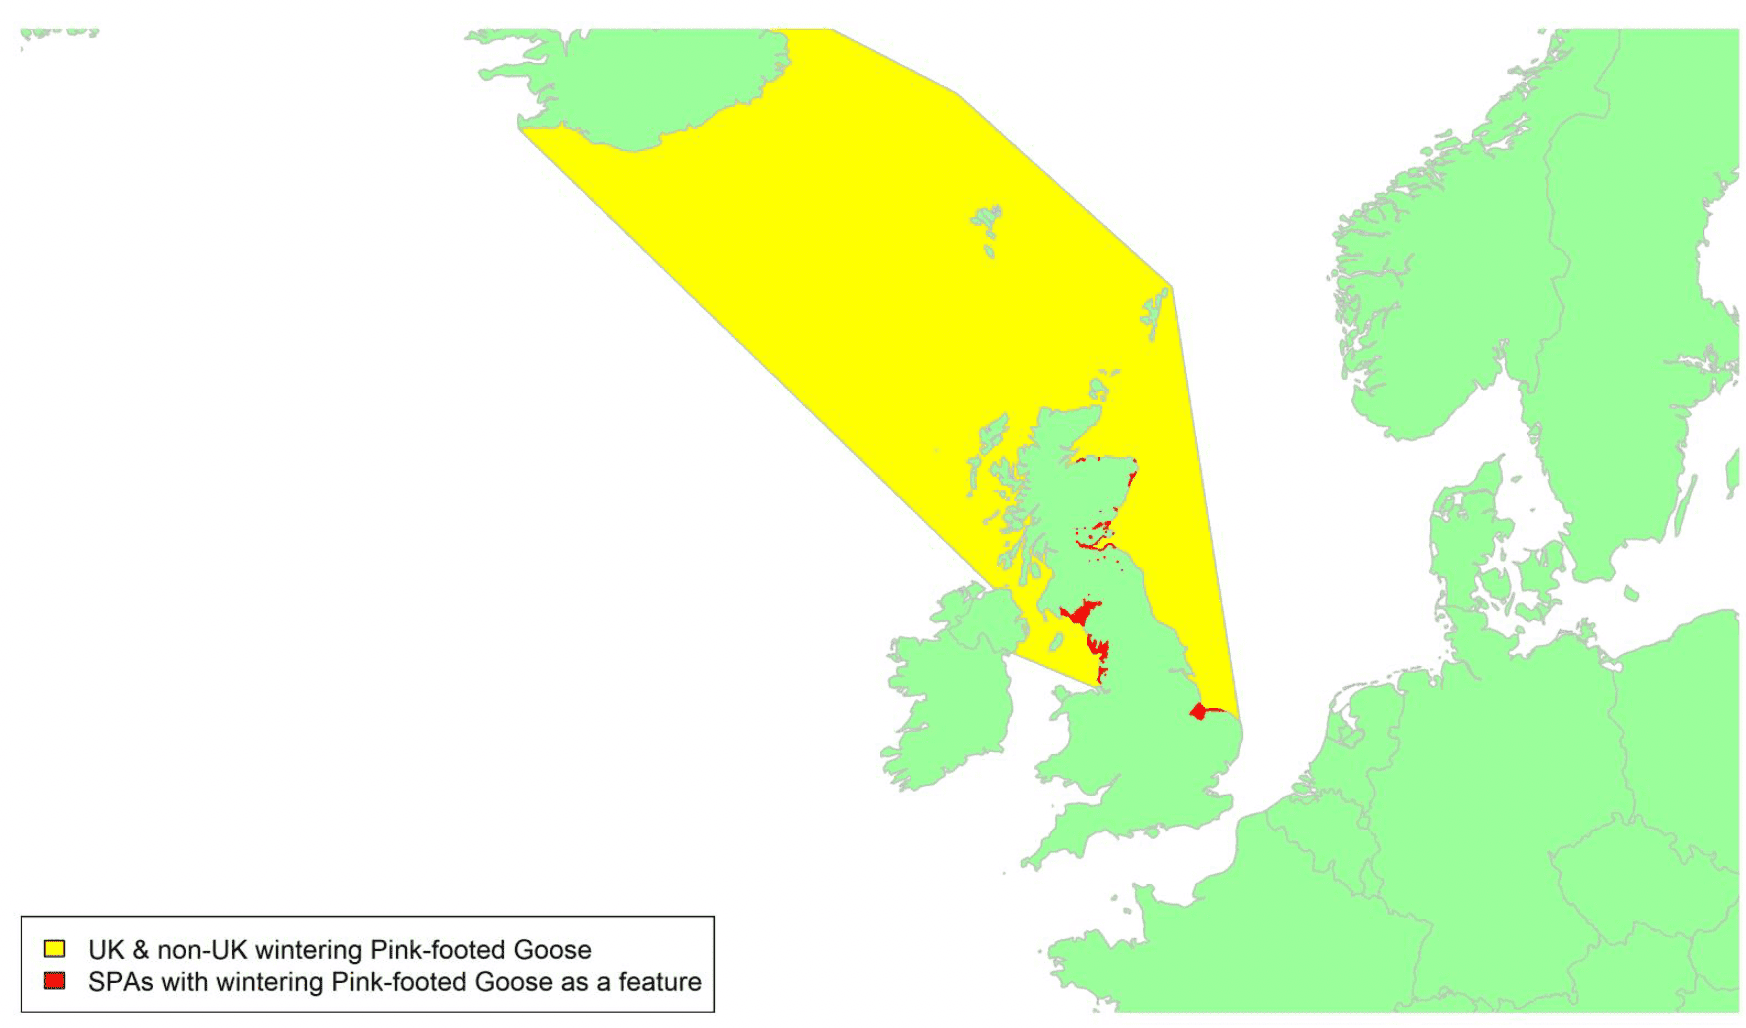 Map of North West Europe showing migratory routes and SPAs within the UK for Pink-footed Geese as described in the text below.